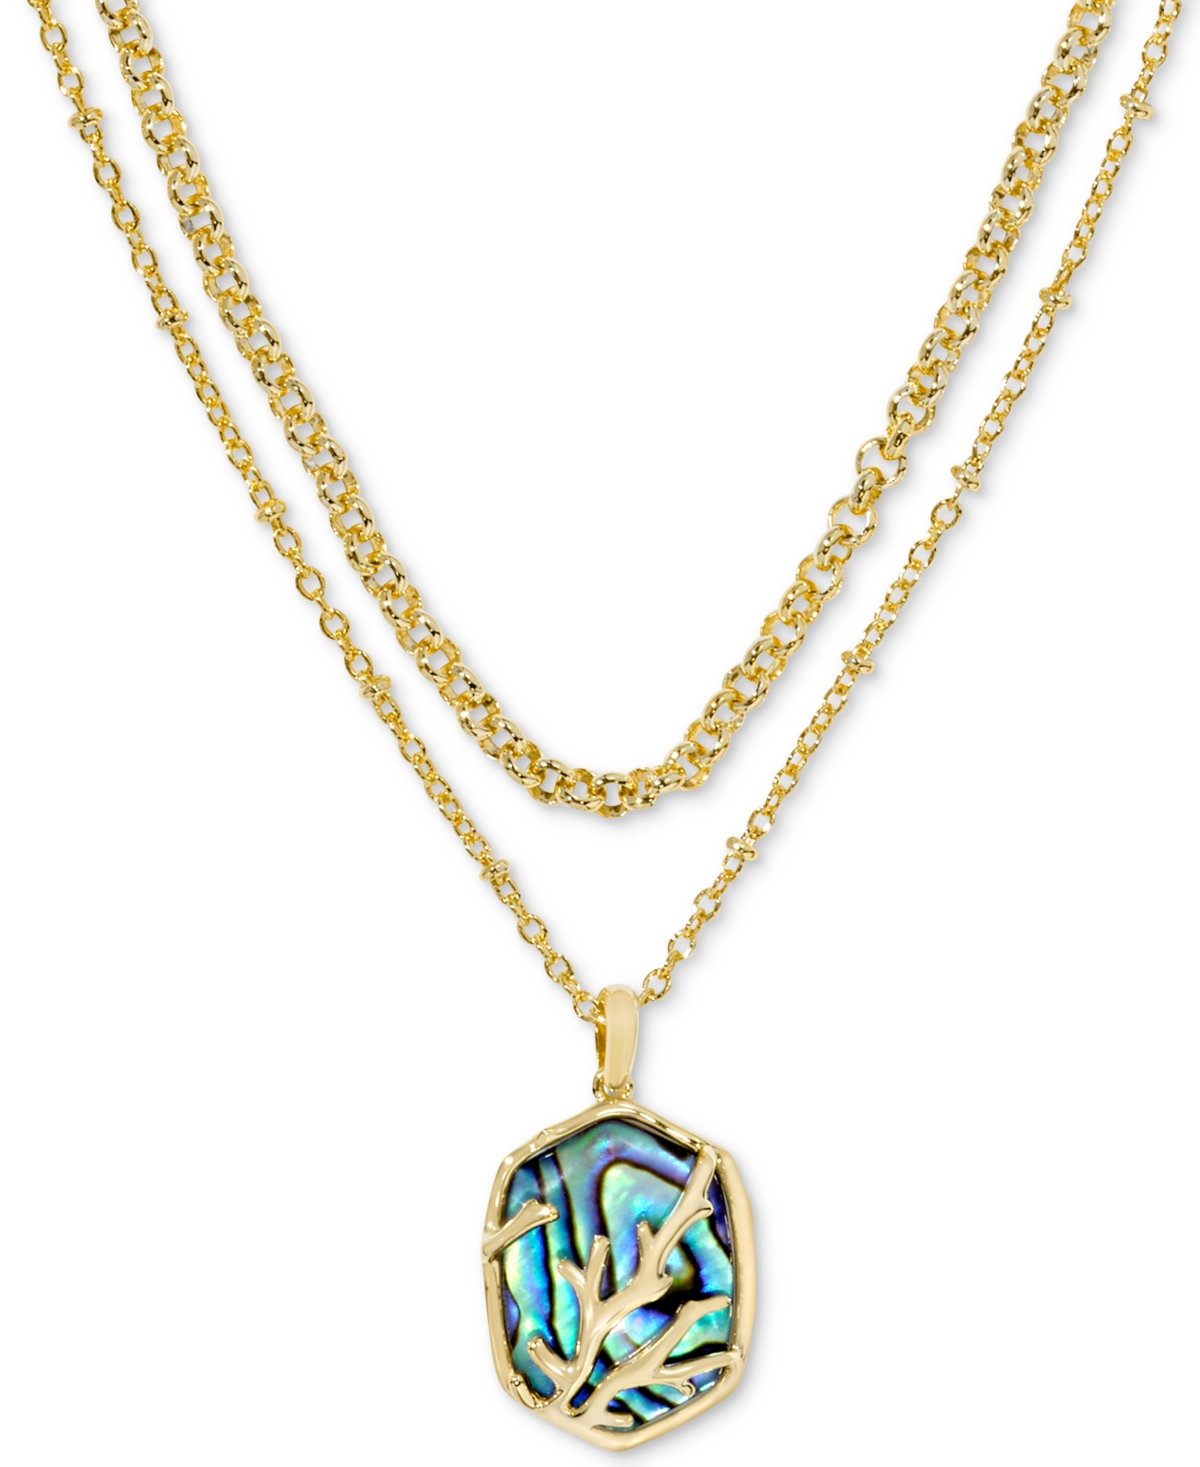 14k Gold-Plated Framed Stone Layered Pendant Necklace, 15" + 6" extender - Gold Irid